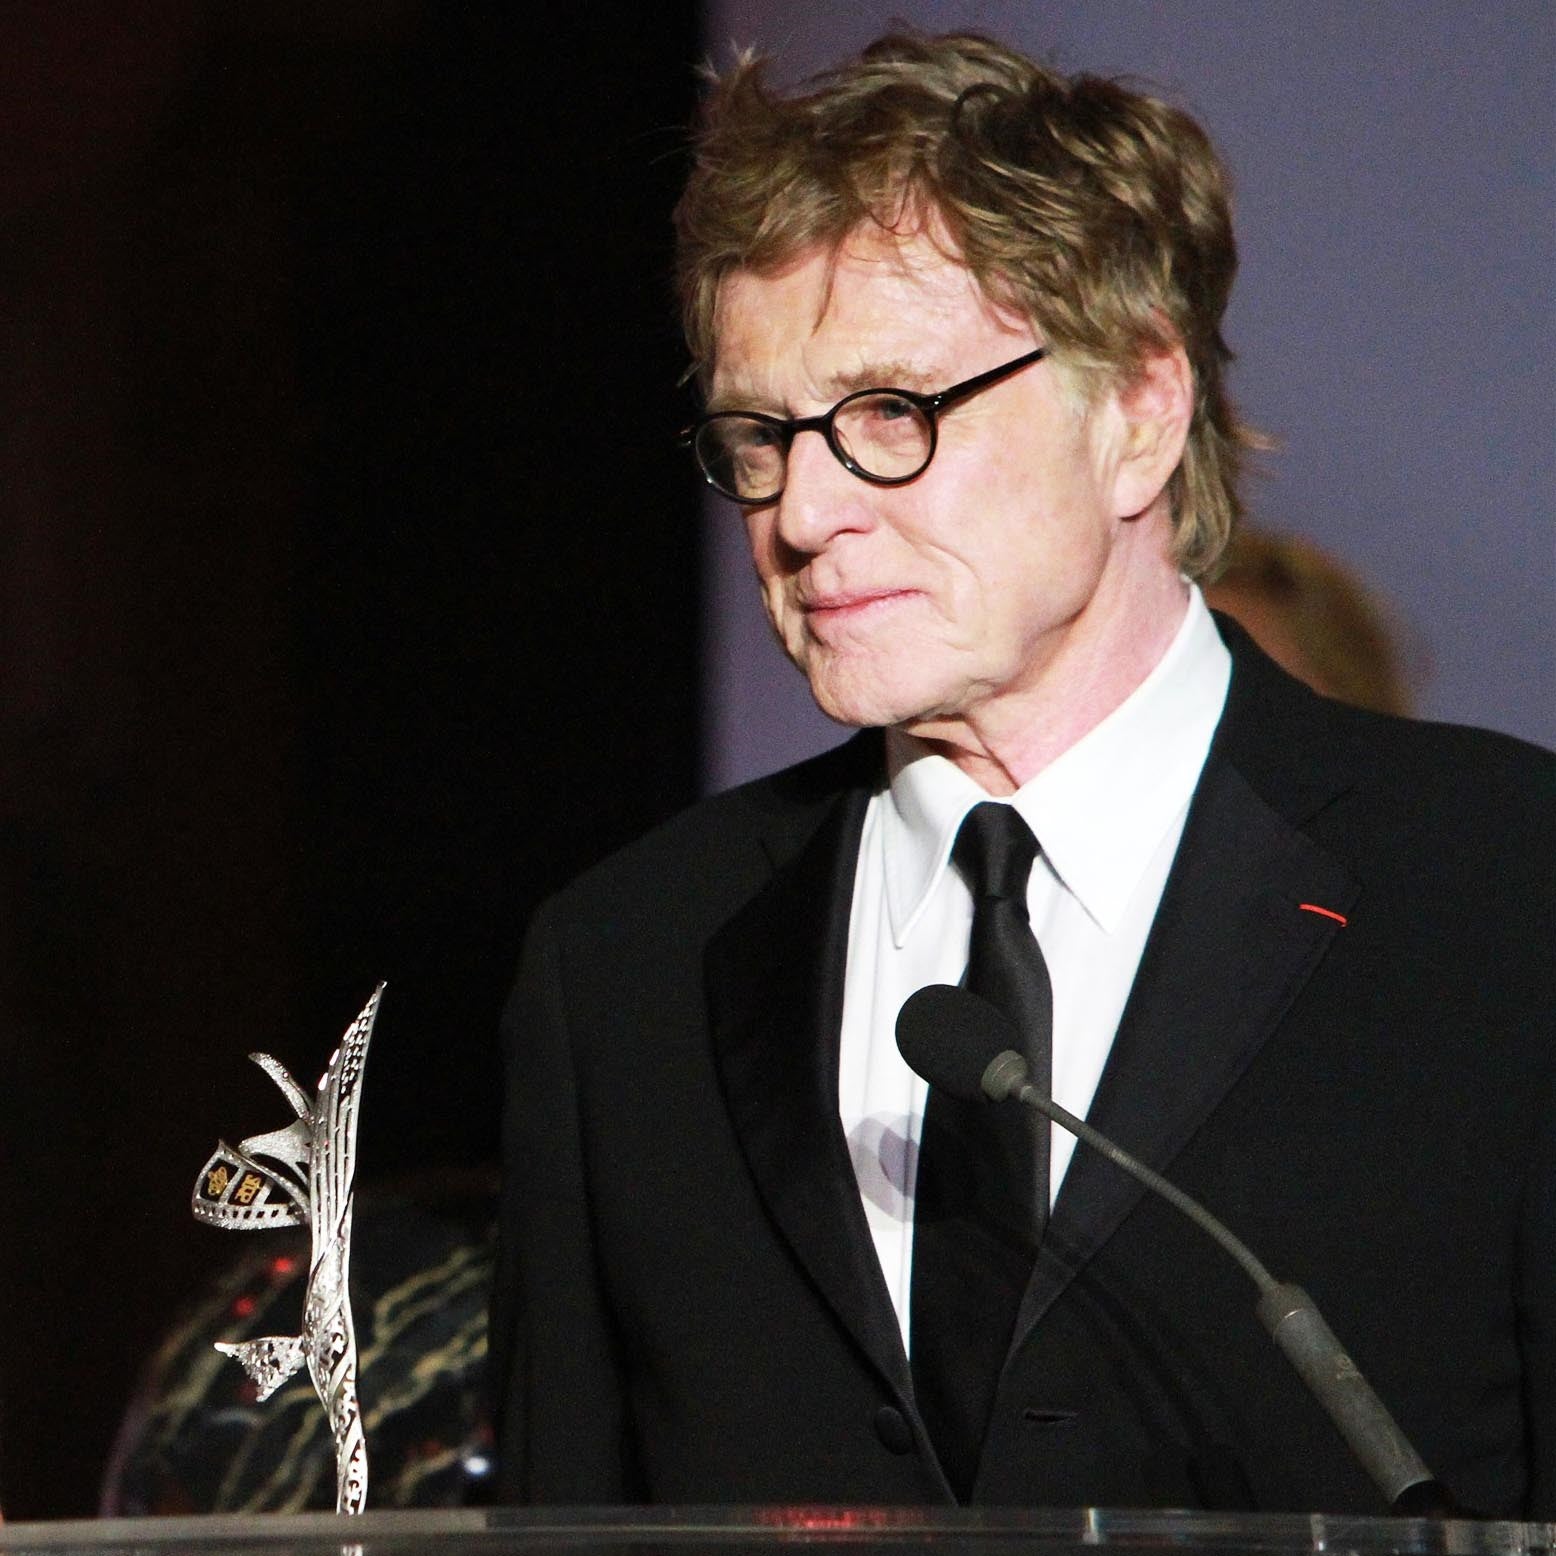 Robert Redford receives Princess Grace Award designed and created by Alex Soldier.